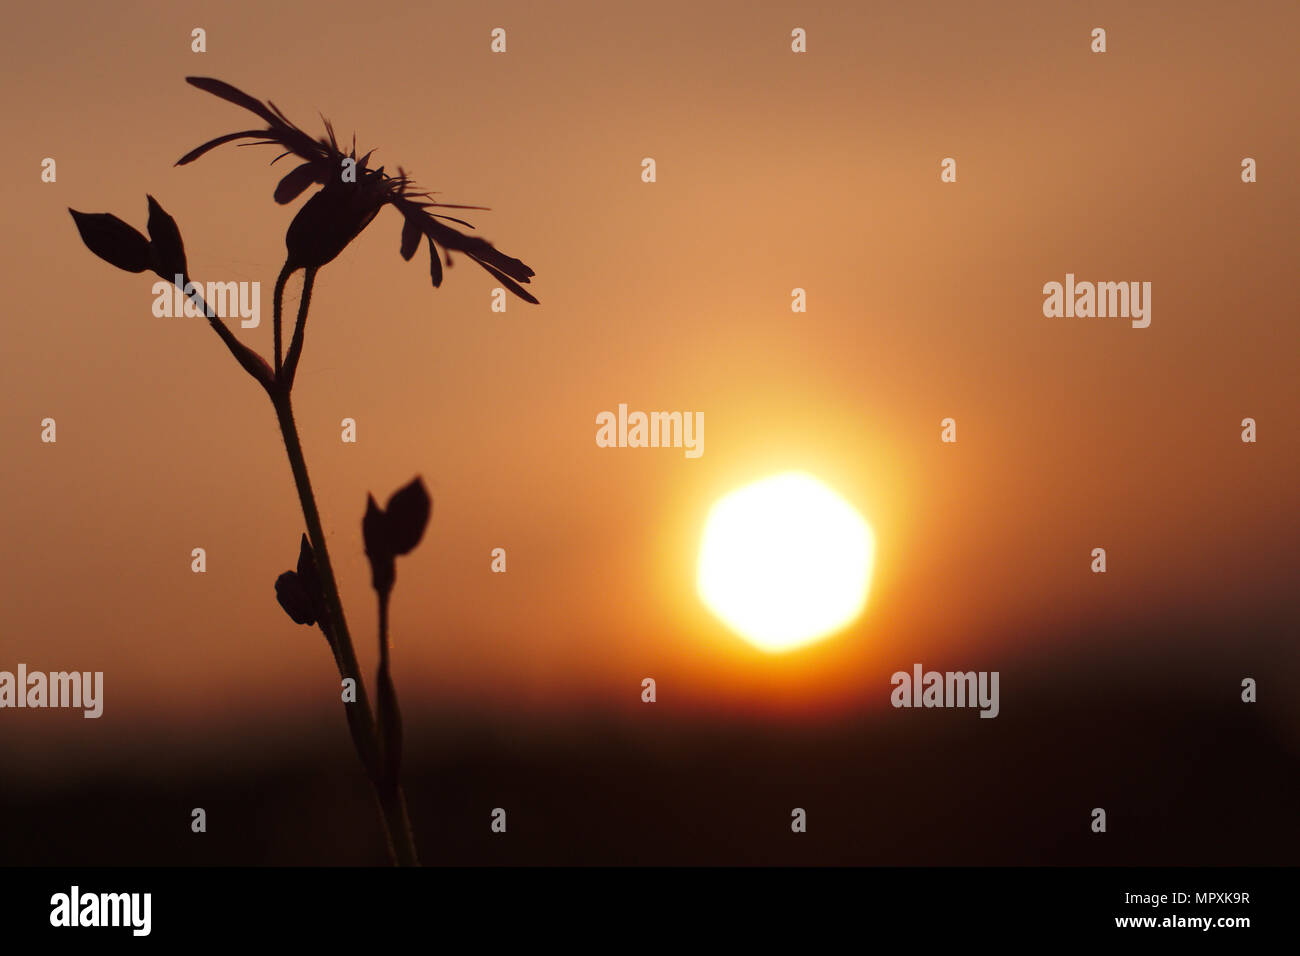 A silhouette of a flower against the sunset. Stock Photo